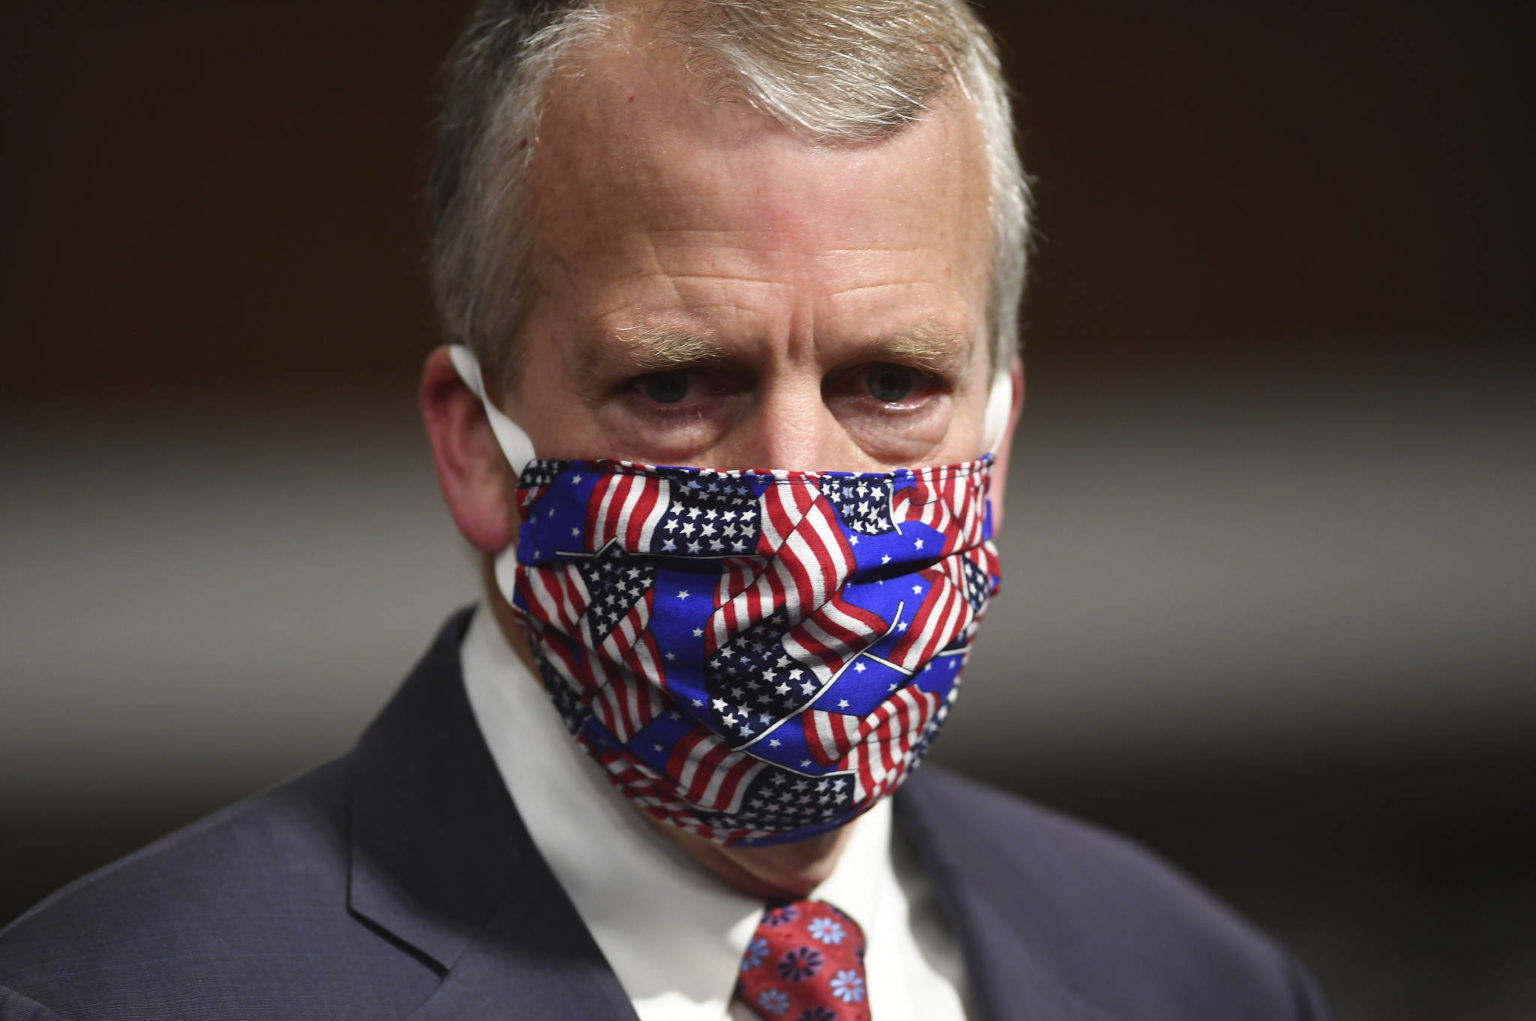 In this May 7, 2020 photo, Sen. Dan Sullivan wears a mask at a hearing in Washington. (Kevin Dietsch / Pool)